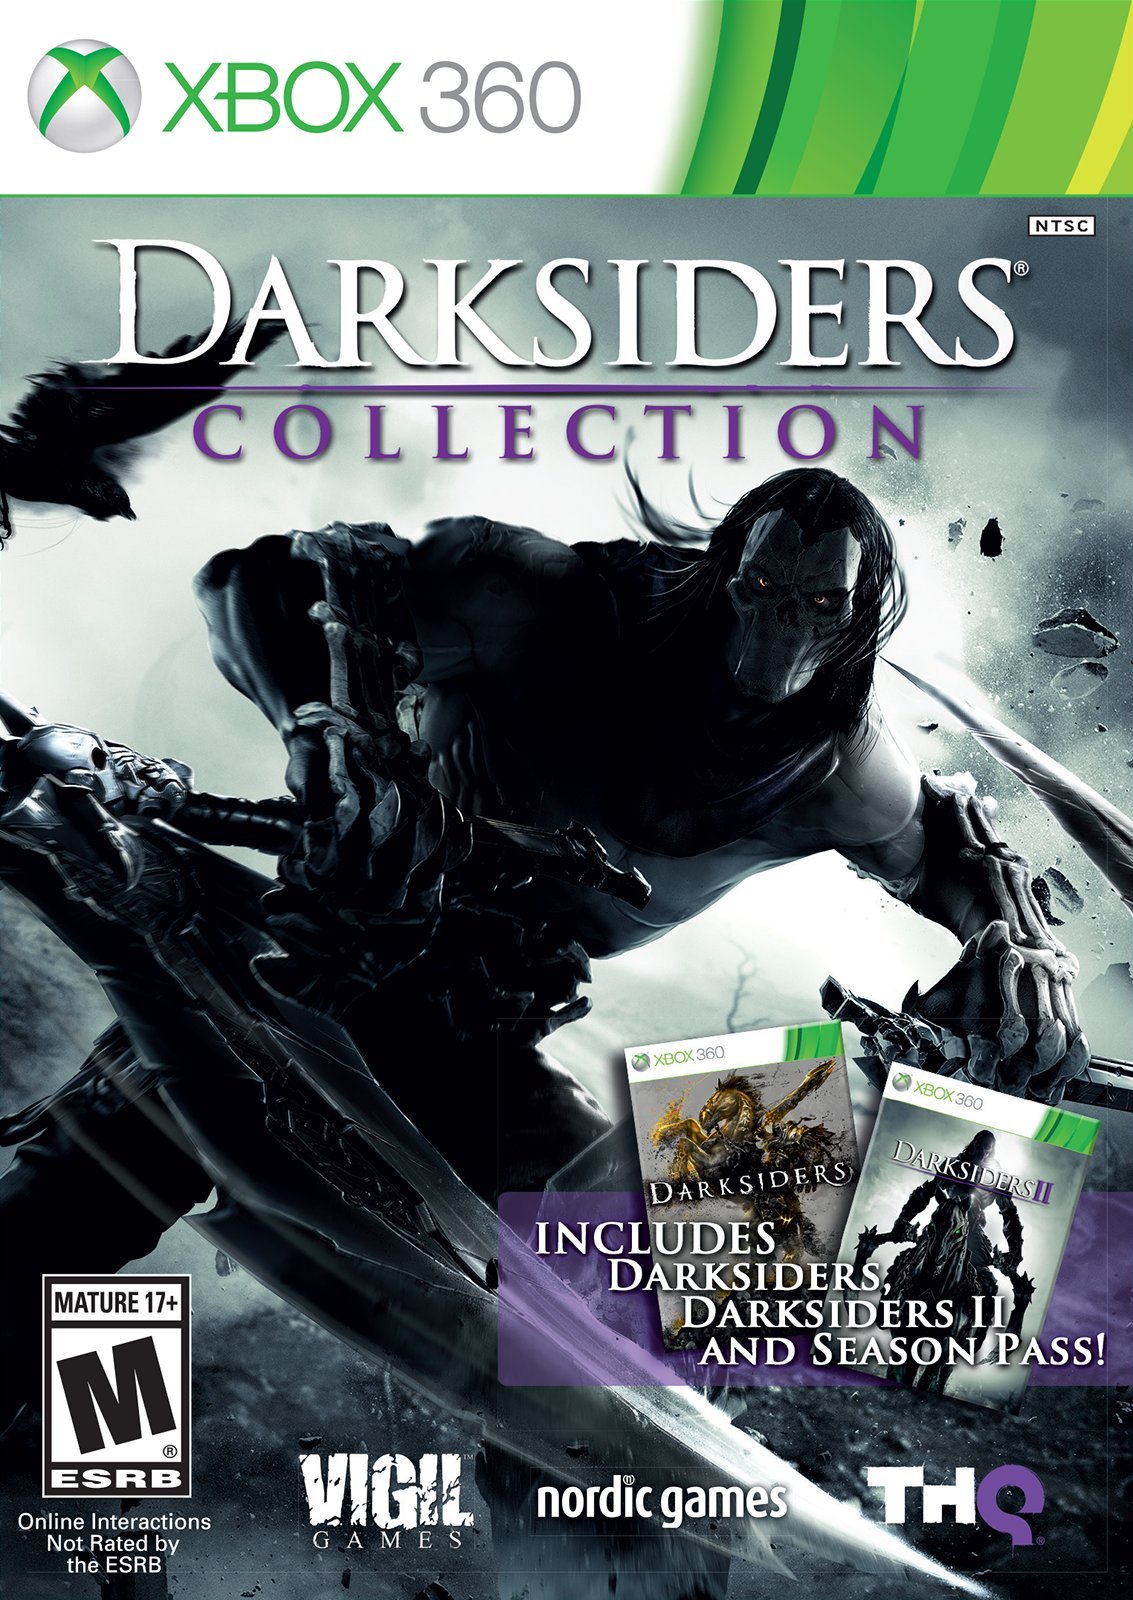 Darksiders Collection Release Date (PS3, Xbox 360, PC)1133 x 1600